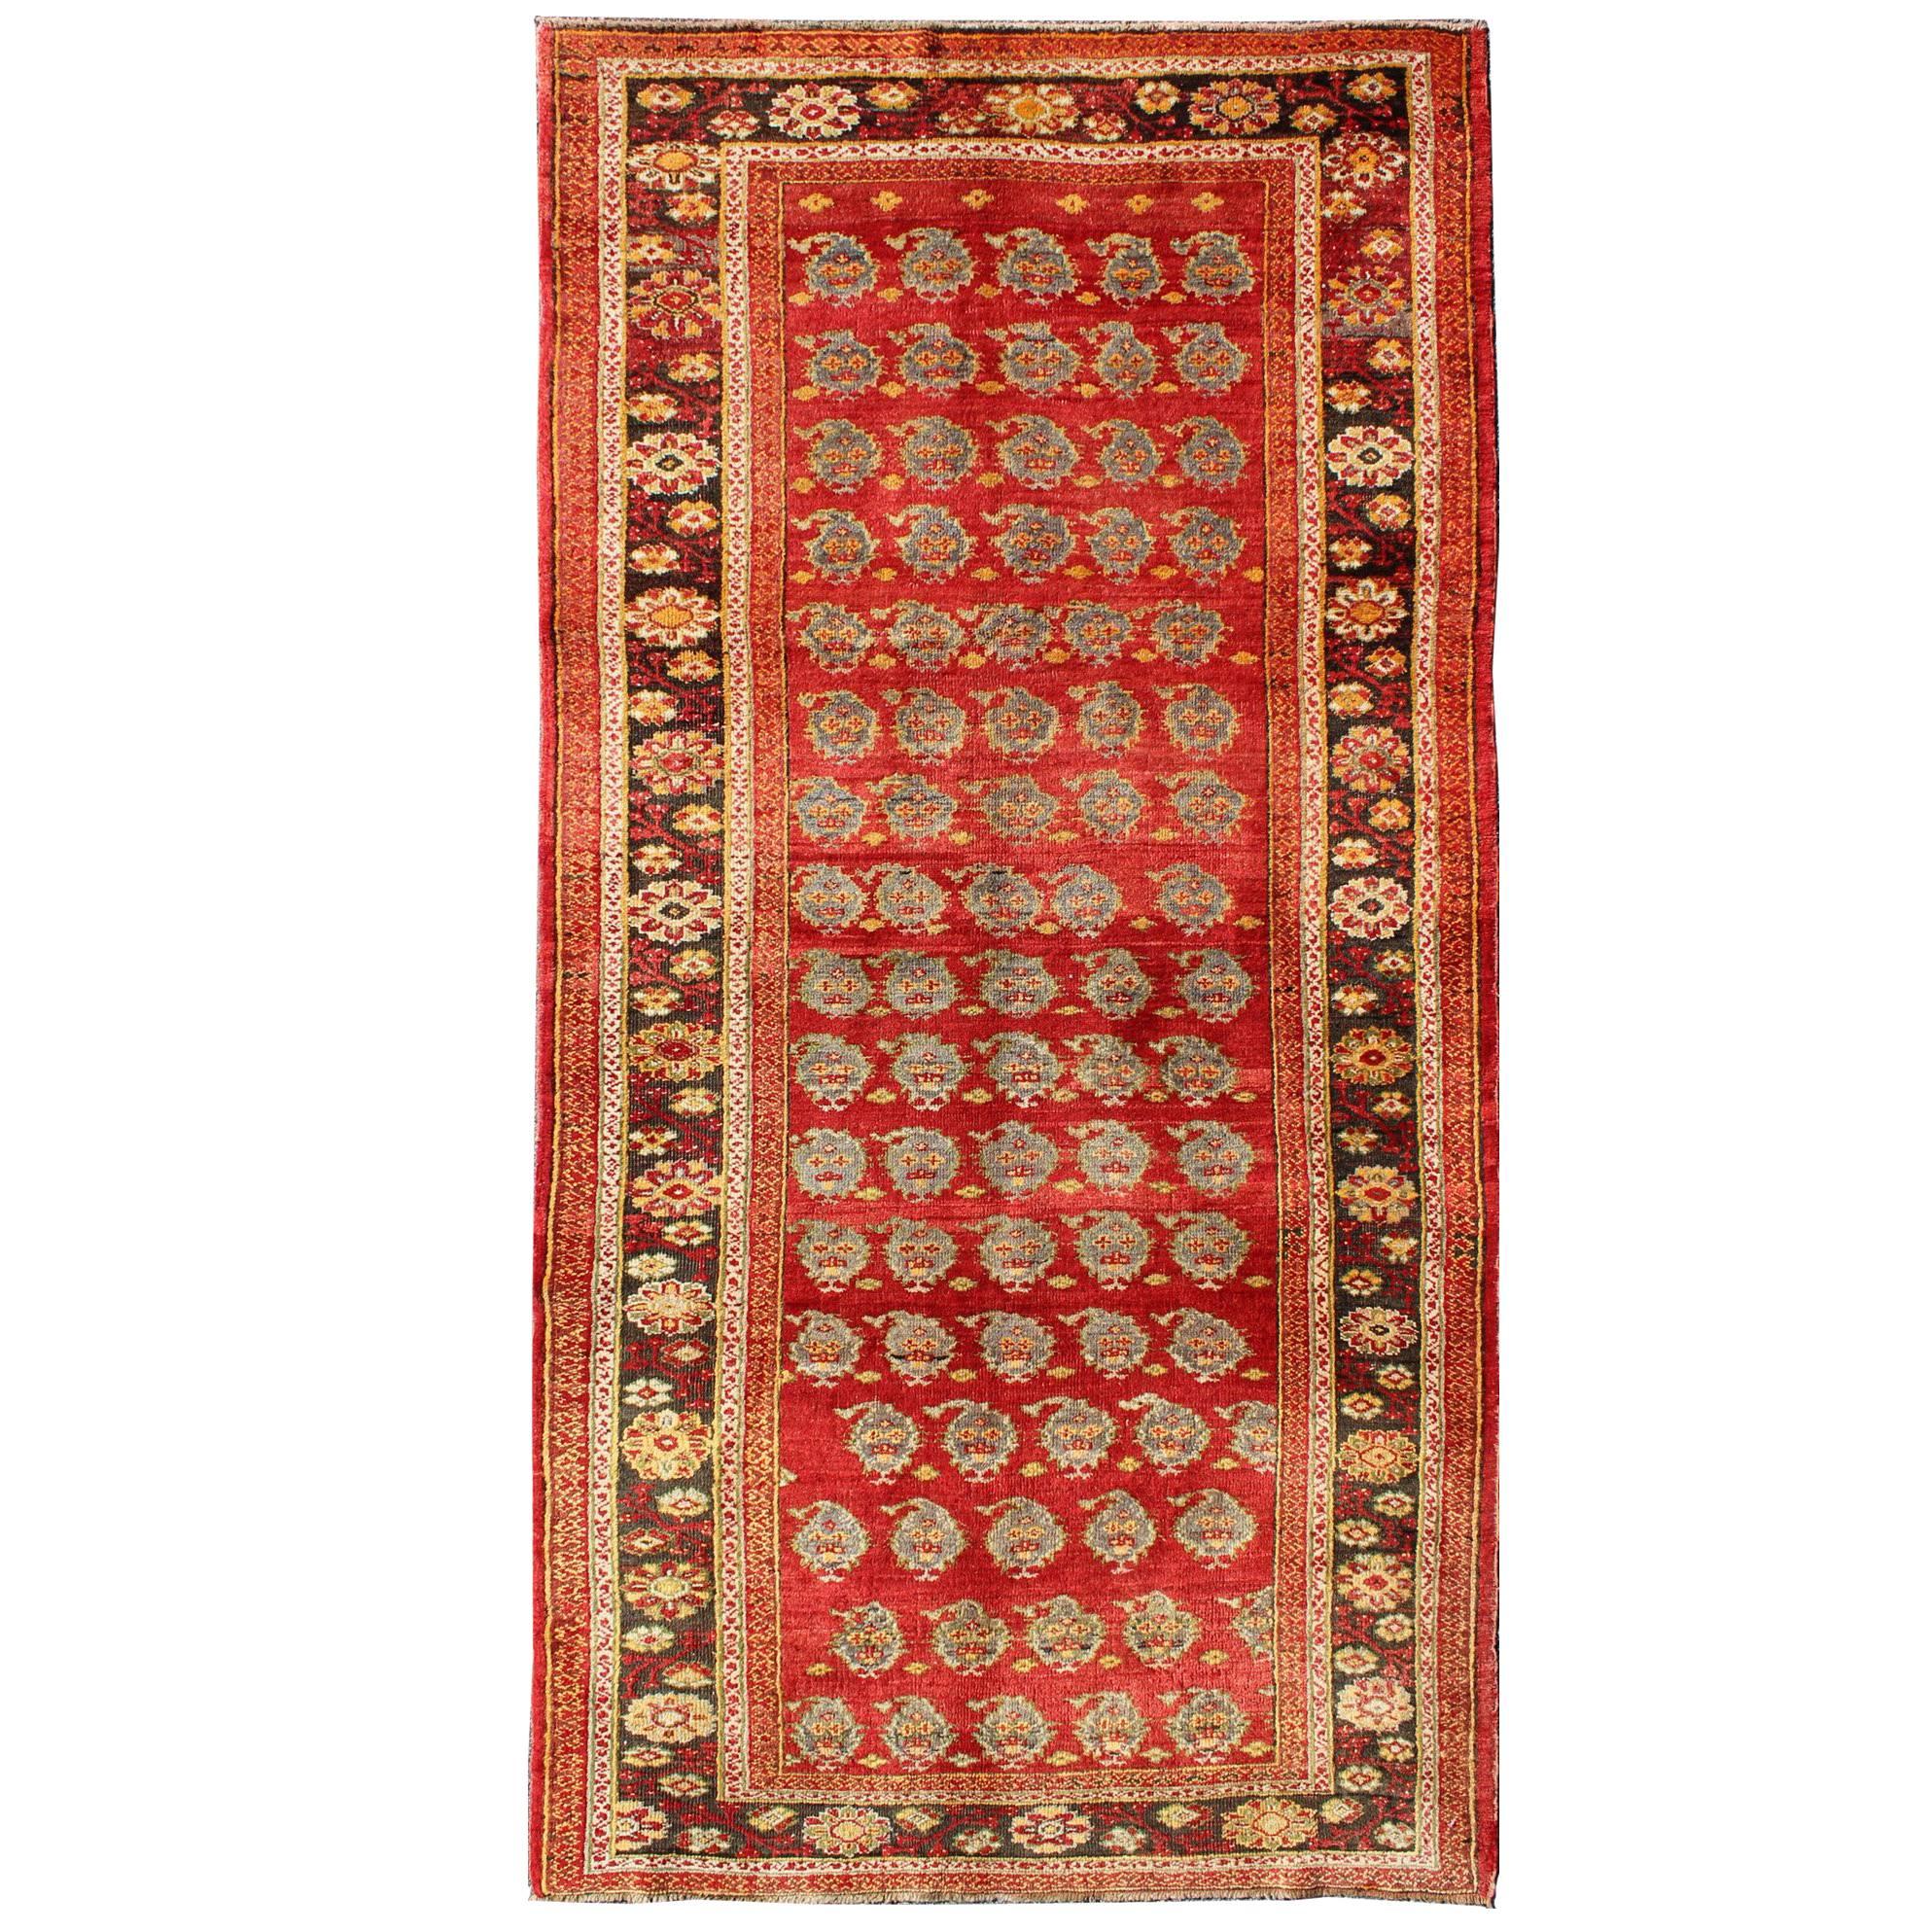 Vintage Turkish Oushak Carpet with All-Over Paisley Design and Central Red Field